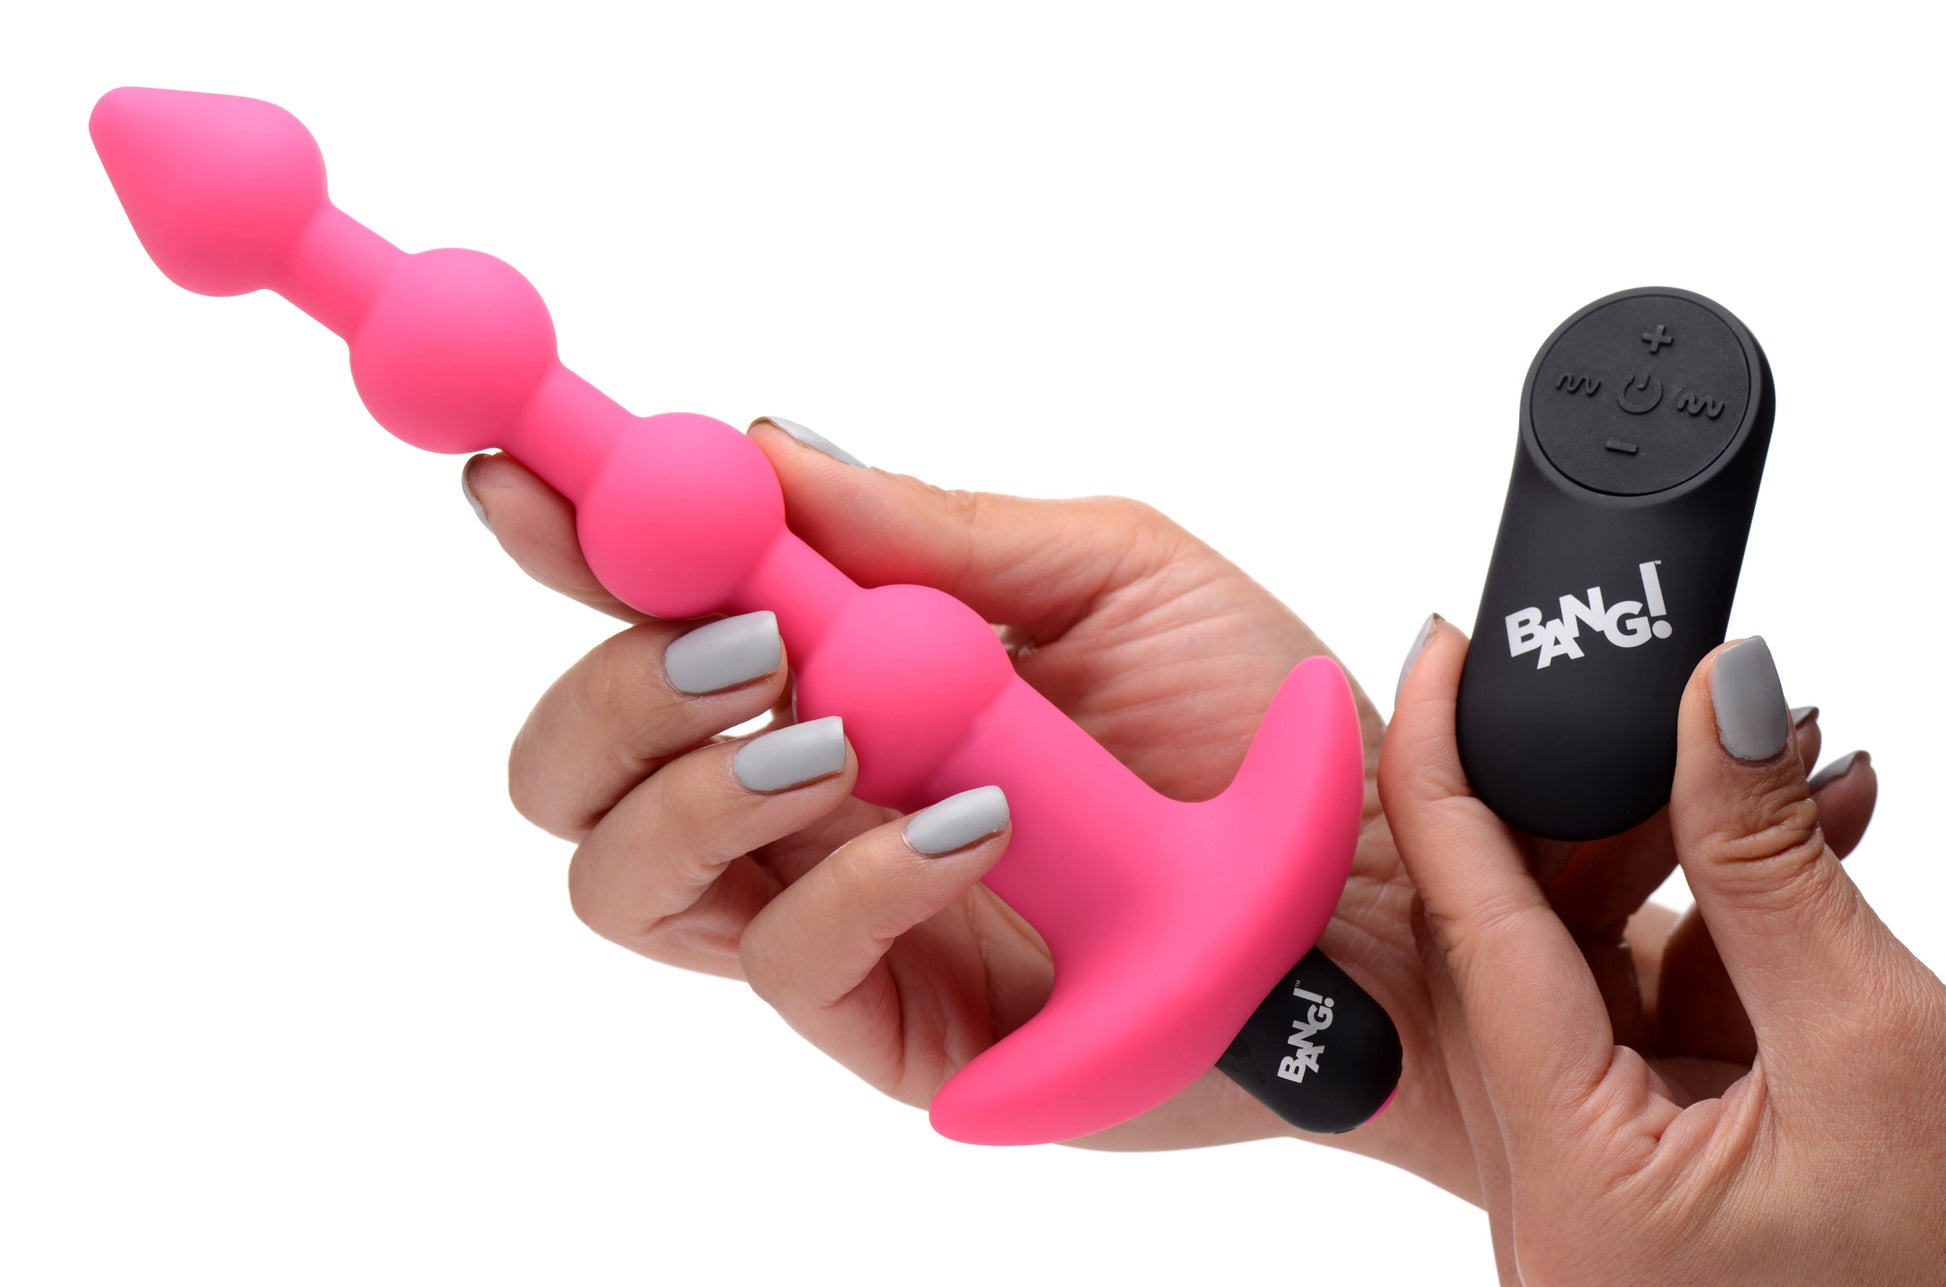 Remote Control Vibrating Silicone Anal Beads - Pink - UABDSM